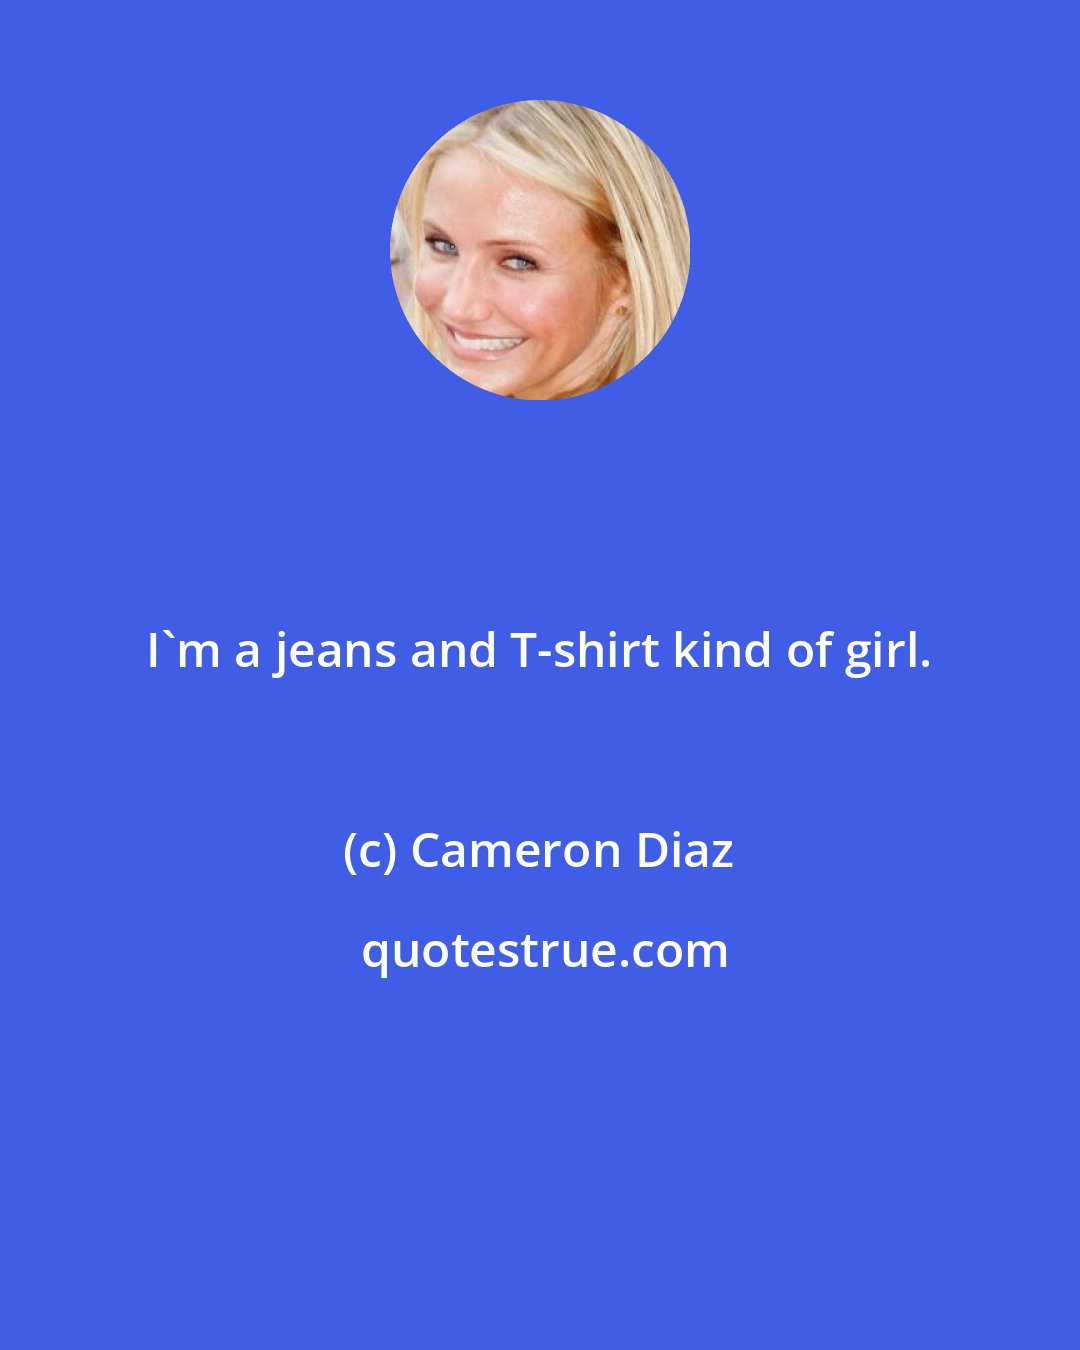 Cameron Diaz: I'm a jeans and T-shirt kind of girl.